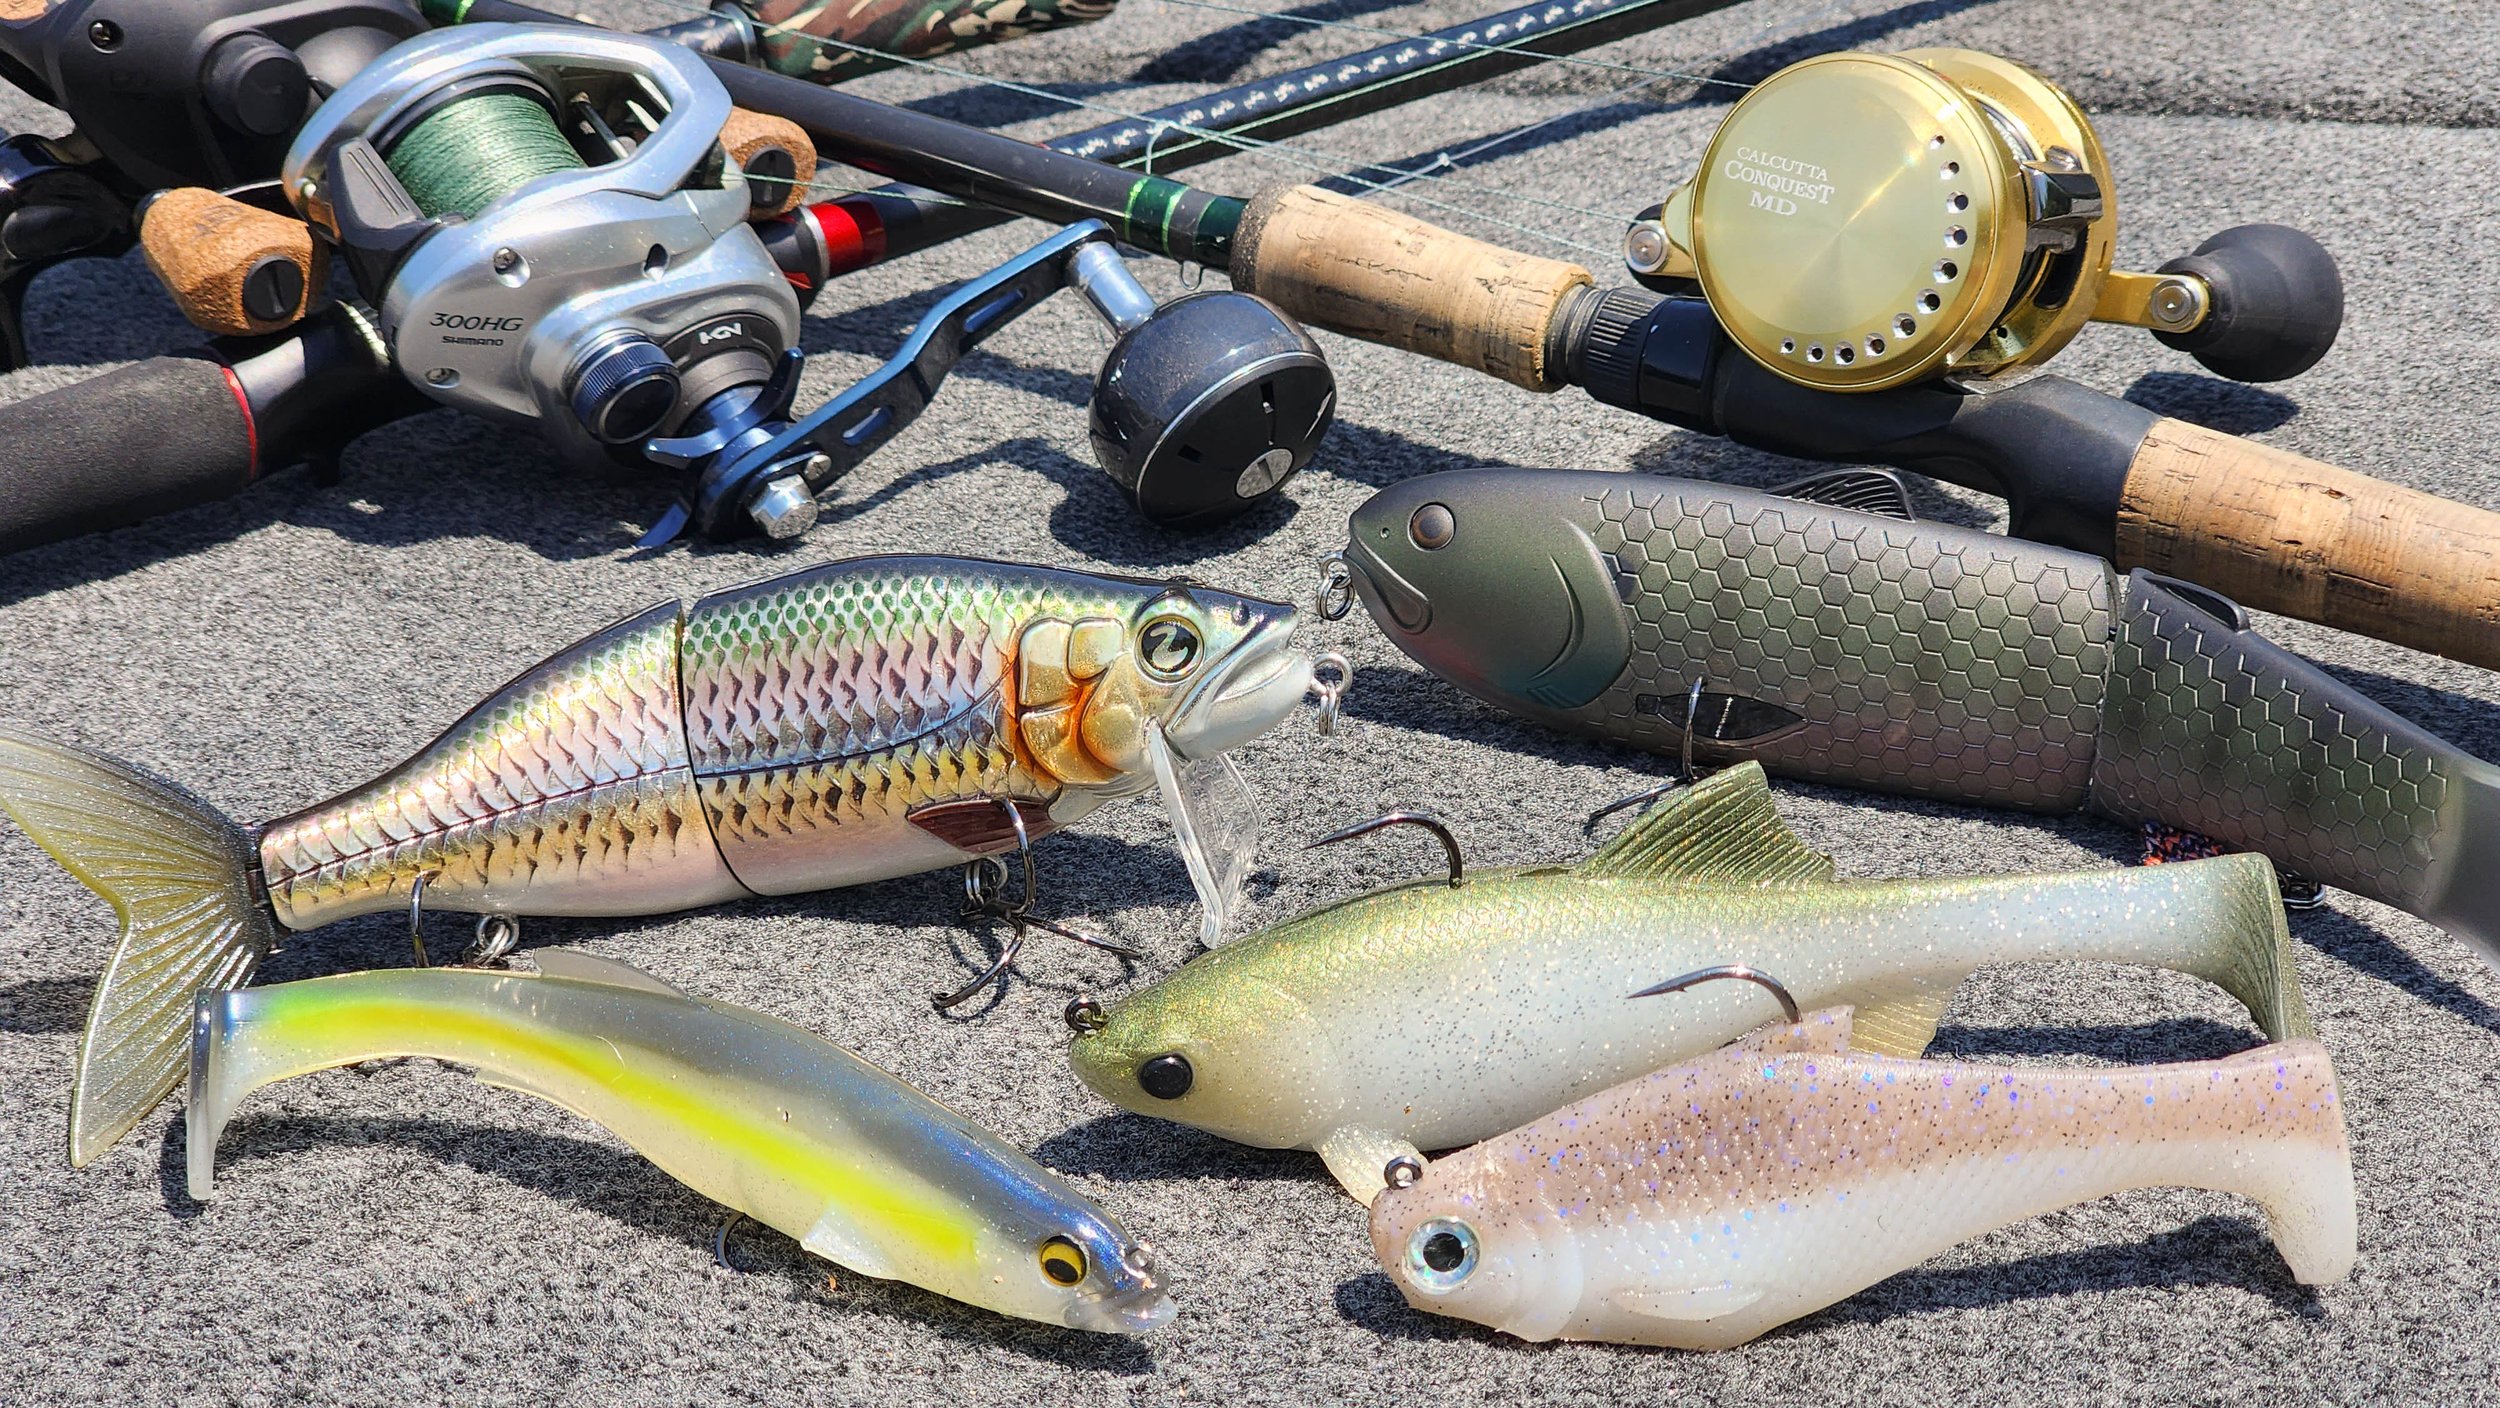 Easy Swimbait Tricks To Catch Big Bass All Summer! — Tactical Bassin' - Bass  Fishing Blog